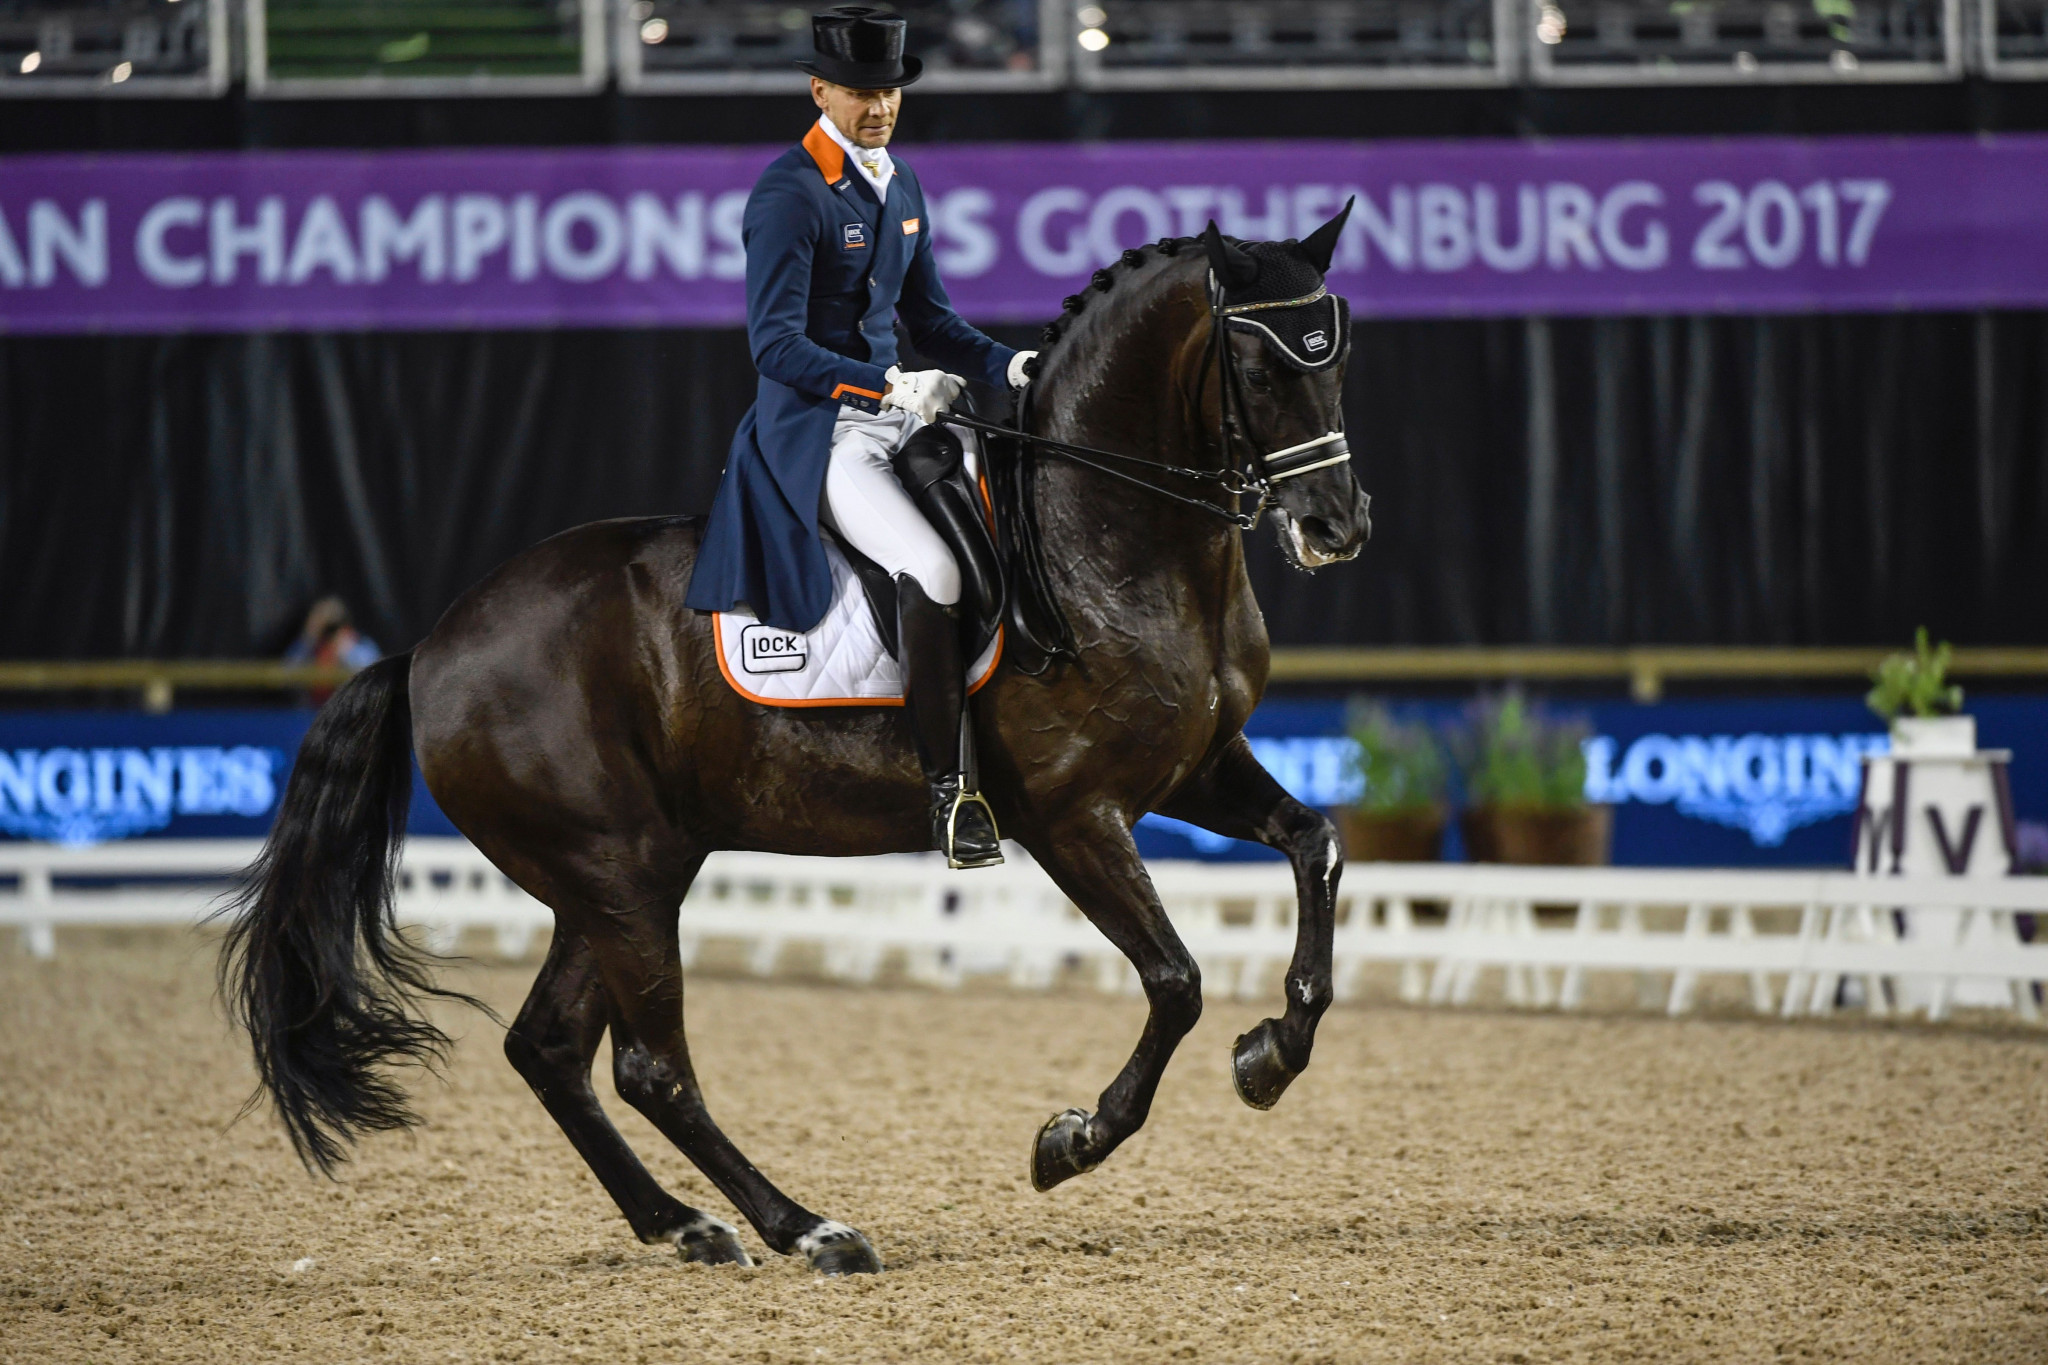 The Netherlands' Edward Gal rounded out the top three ©FEI